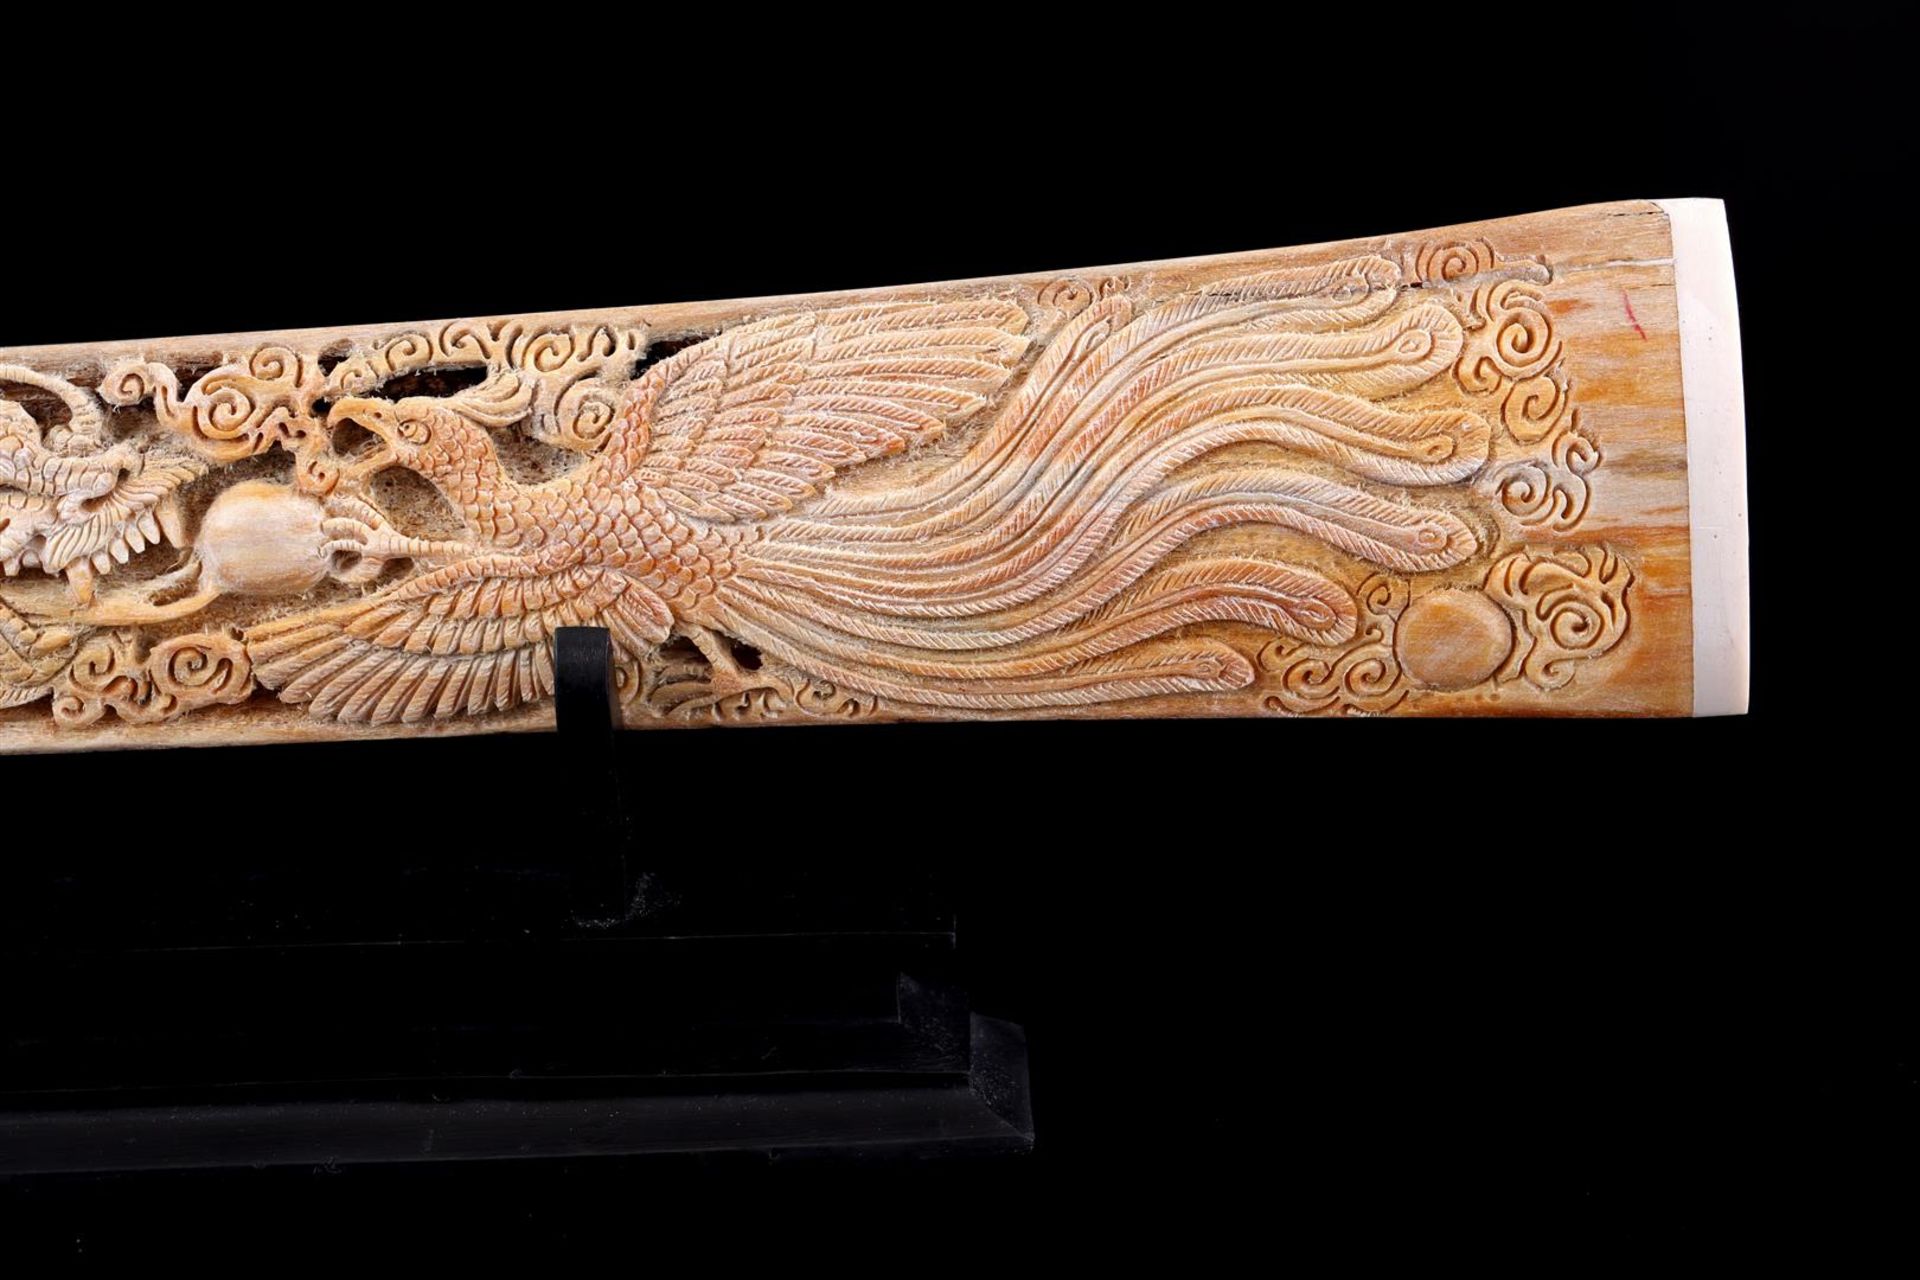 Swordfish tusk with finely hand-carved figure of the dragon - Image 2 of 5